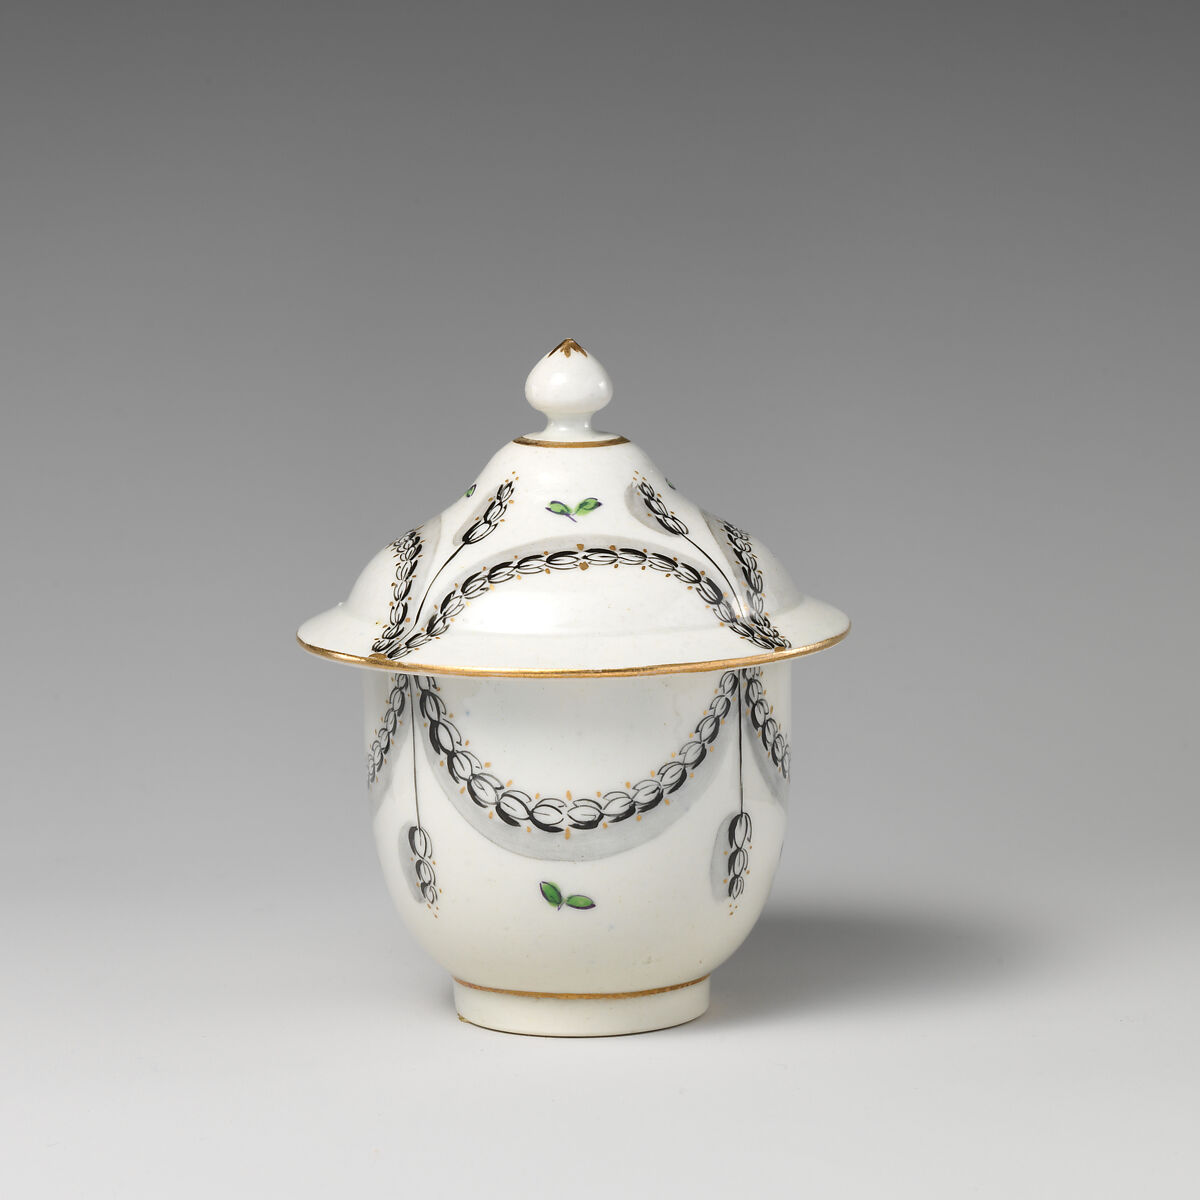 Sugar bowl with cover (part of a service), Caughley Factory (British, ca. 1772–1799), Soft-paste porcelain with enamel decoration and gilding, British, Caughley 